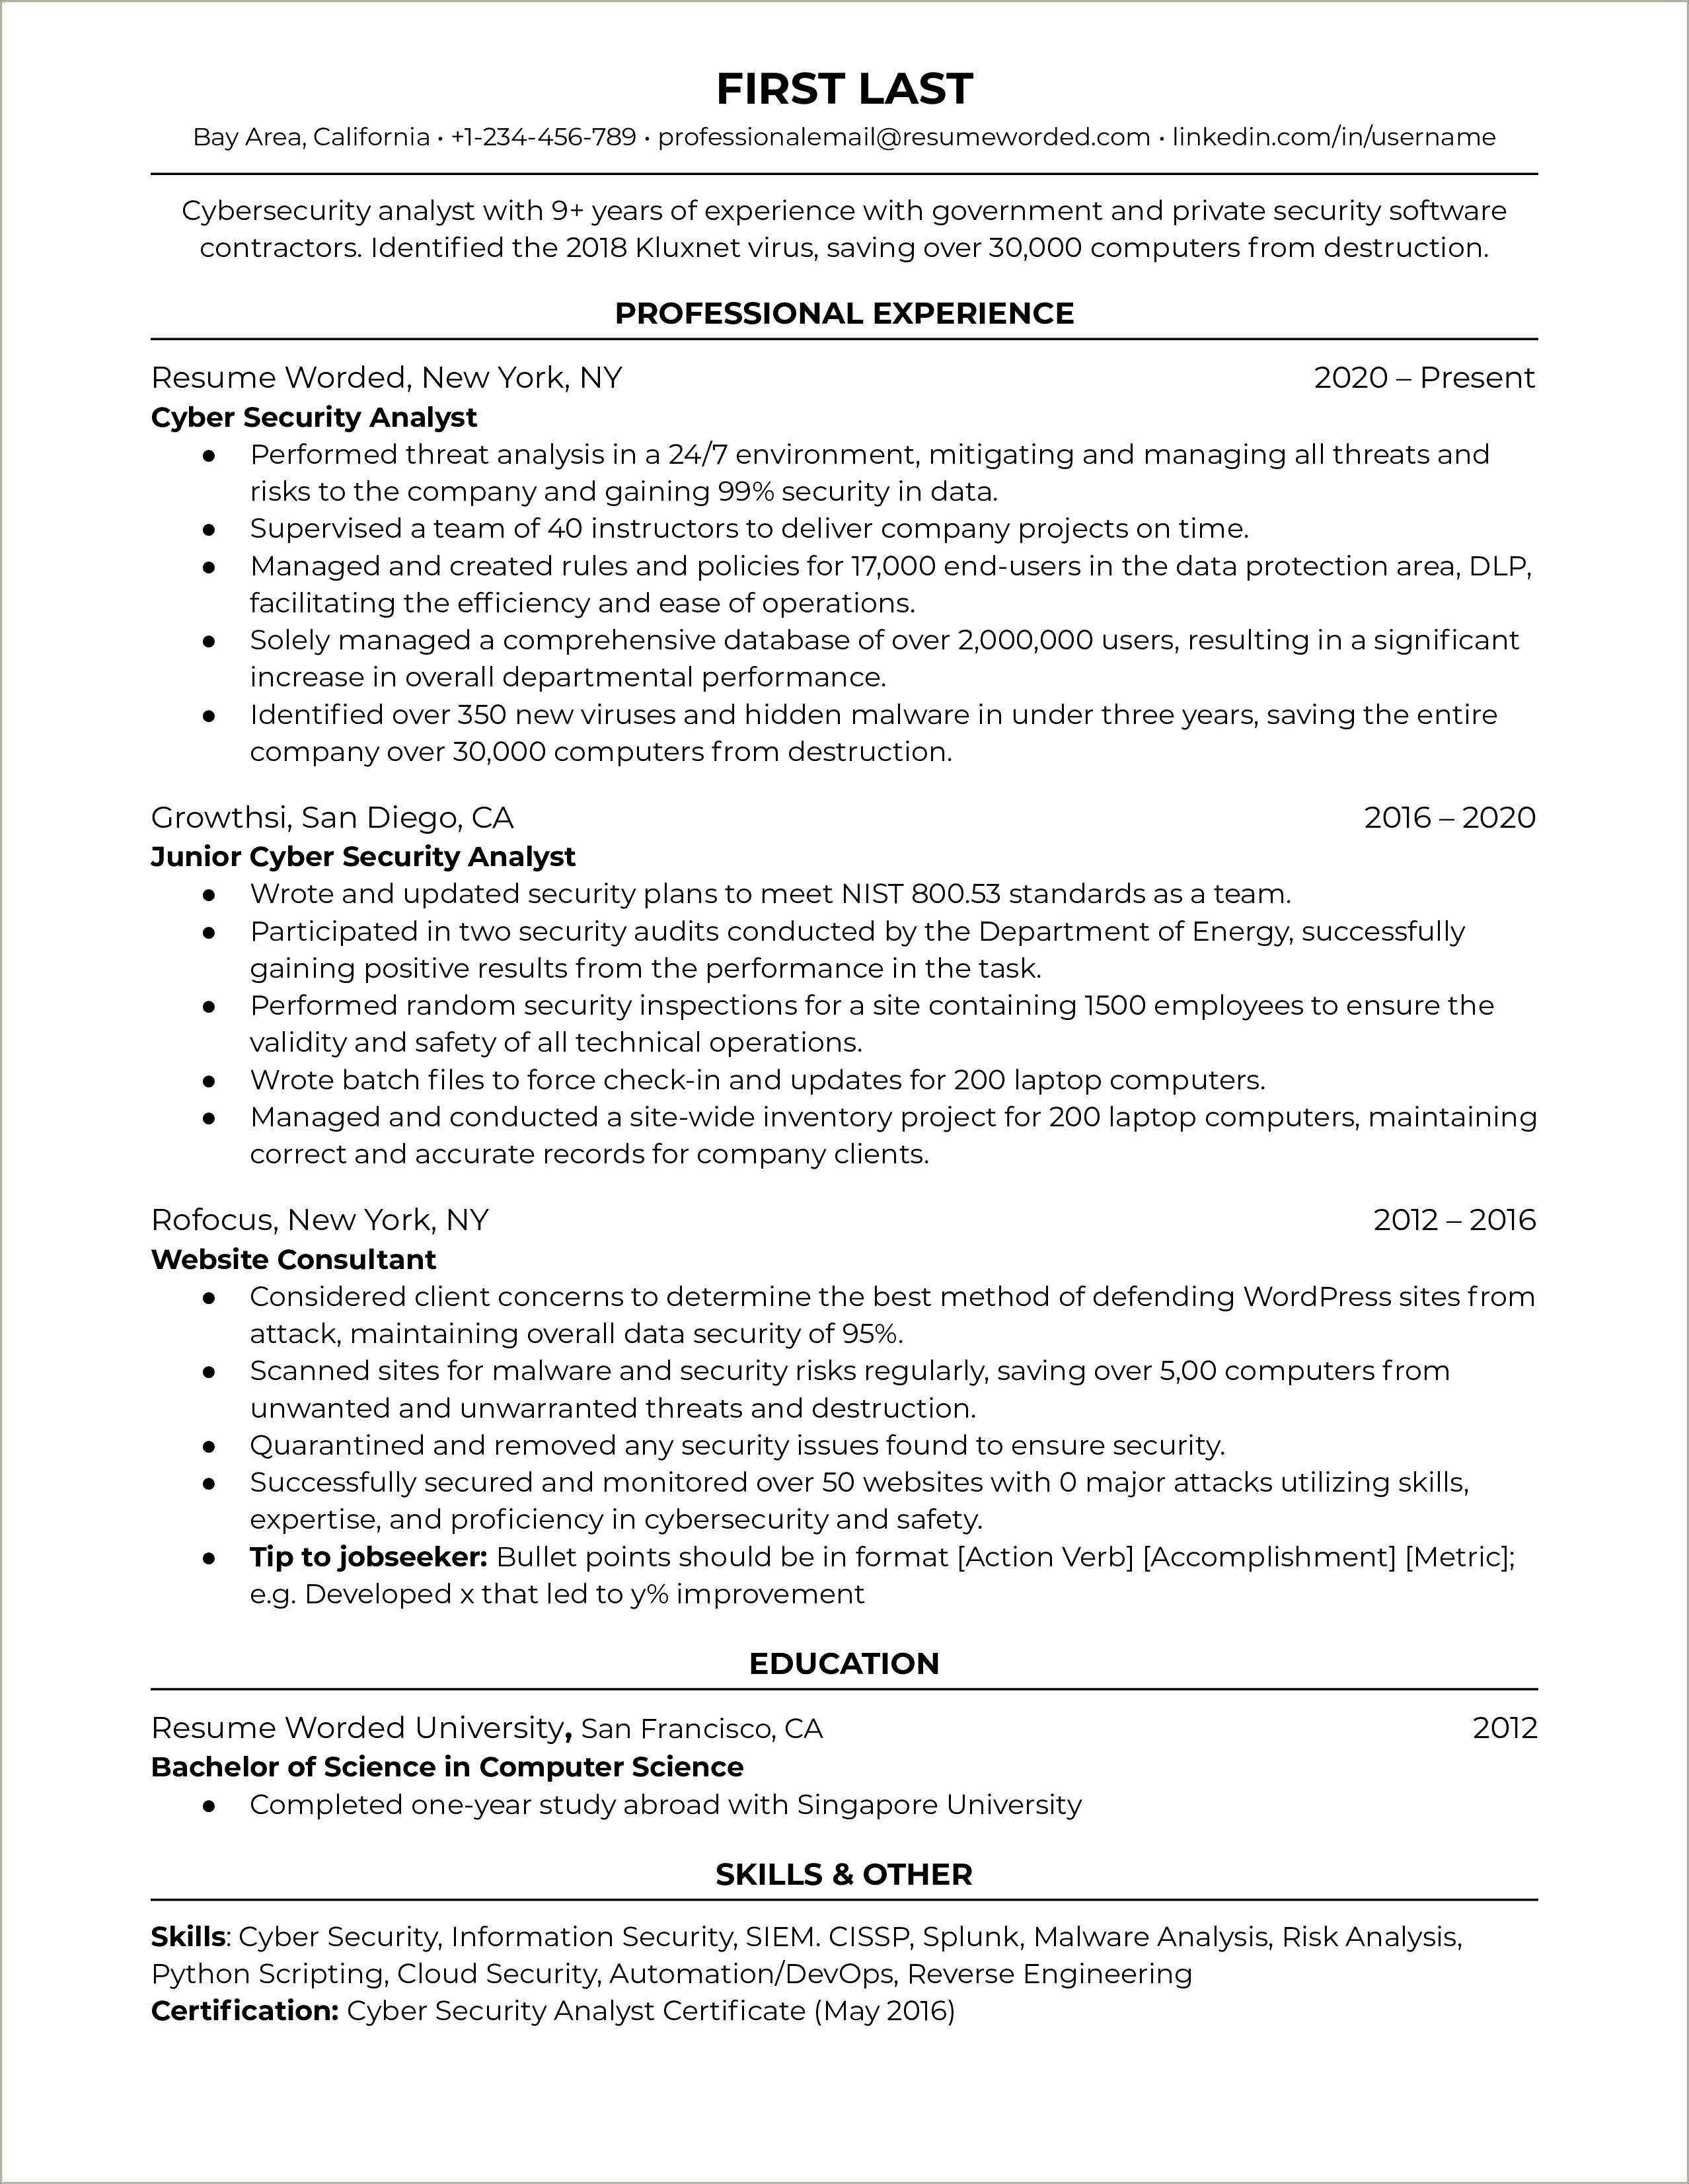 Cyber Security Resume Objective Sample